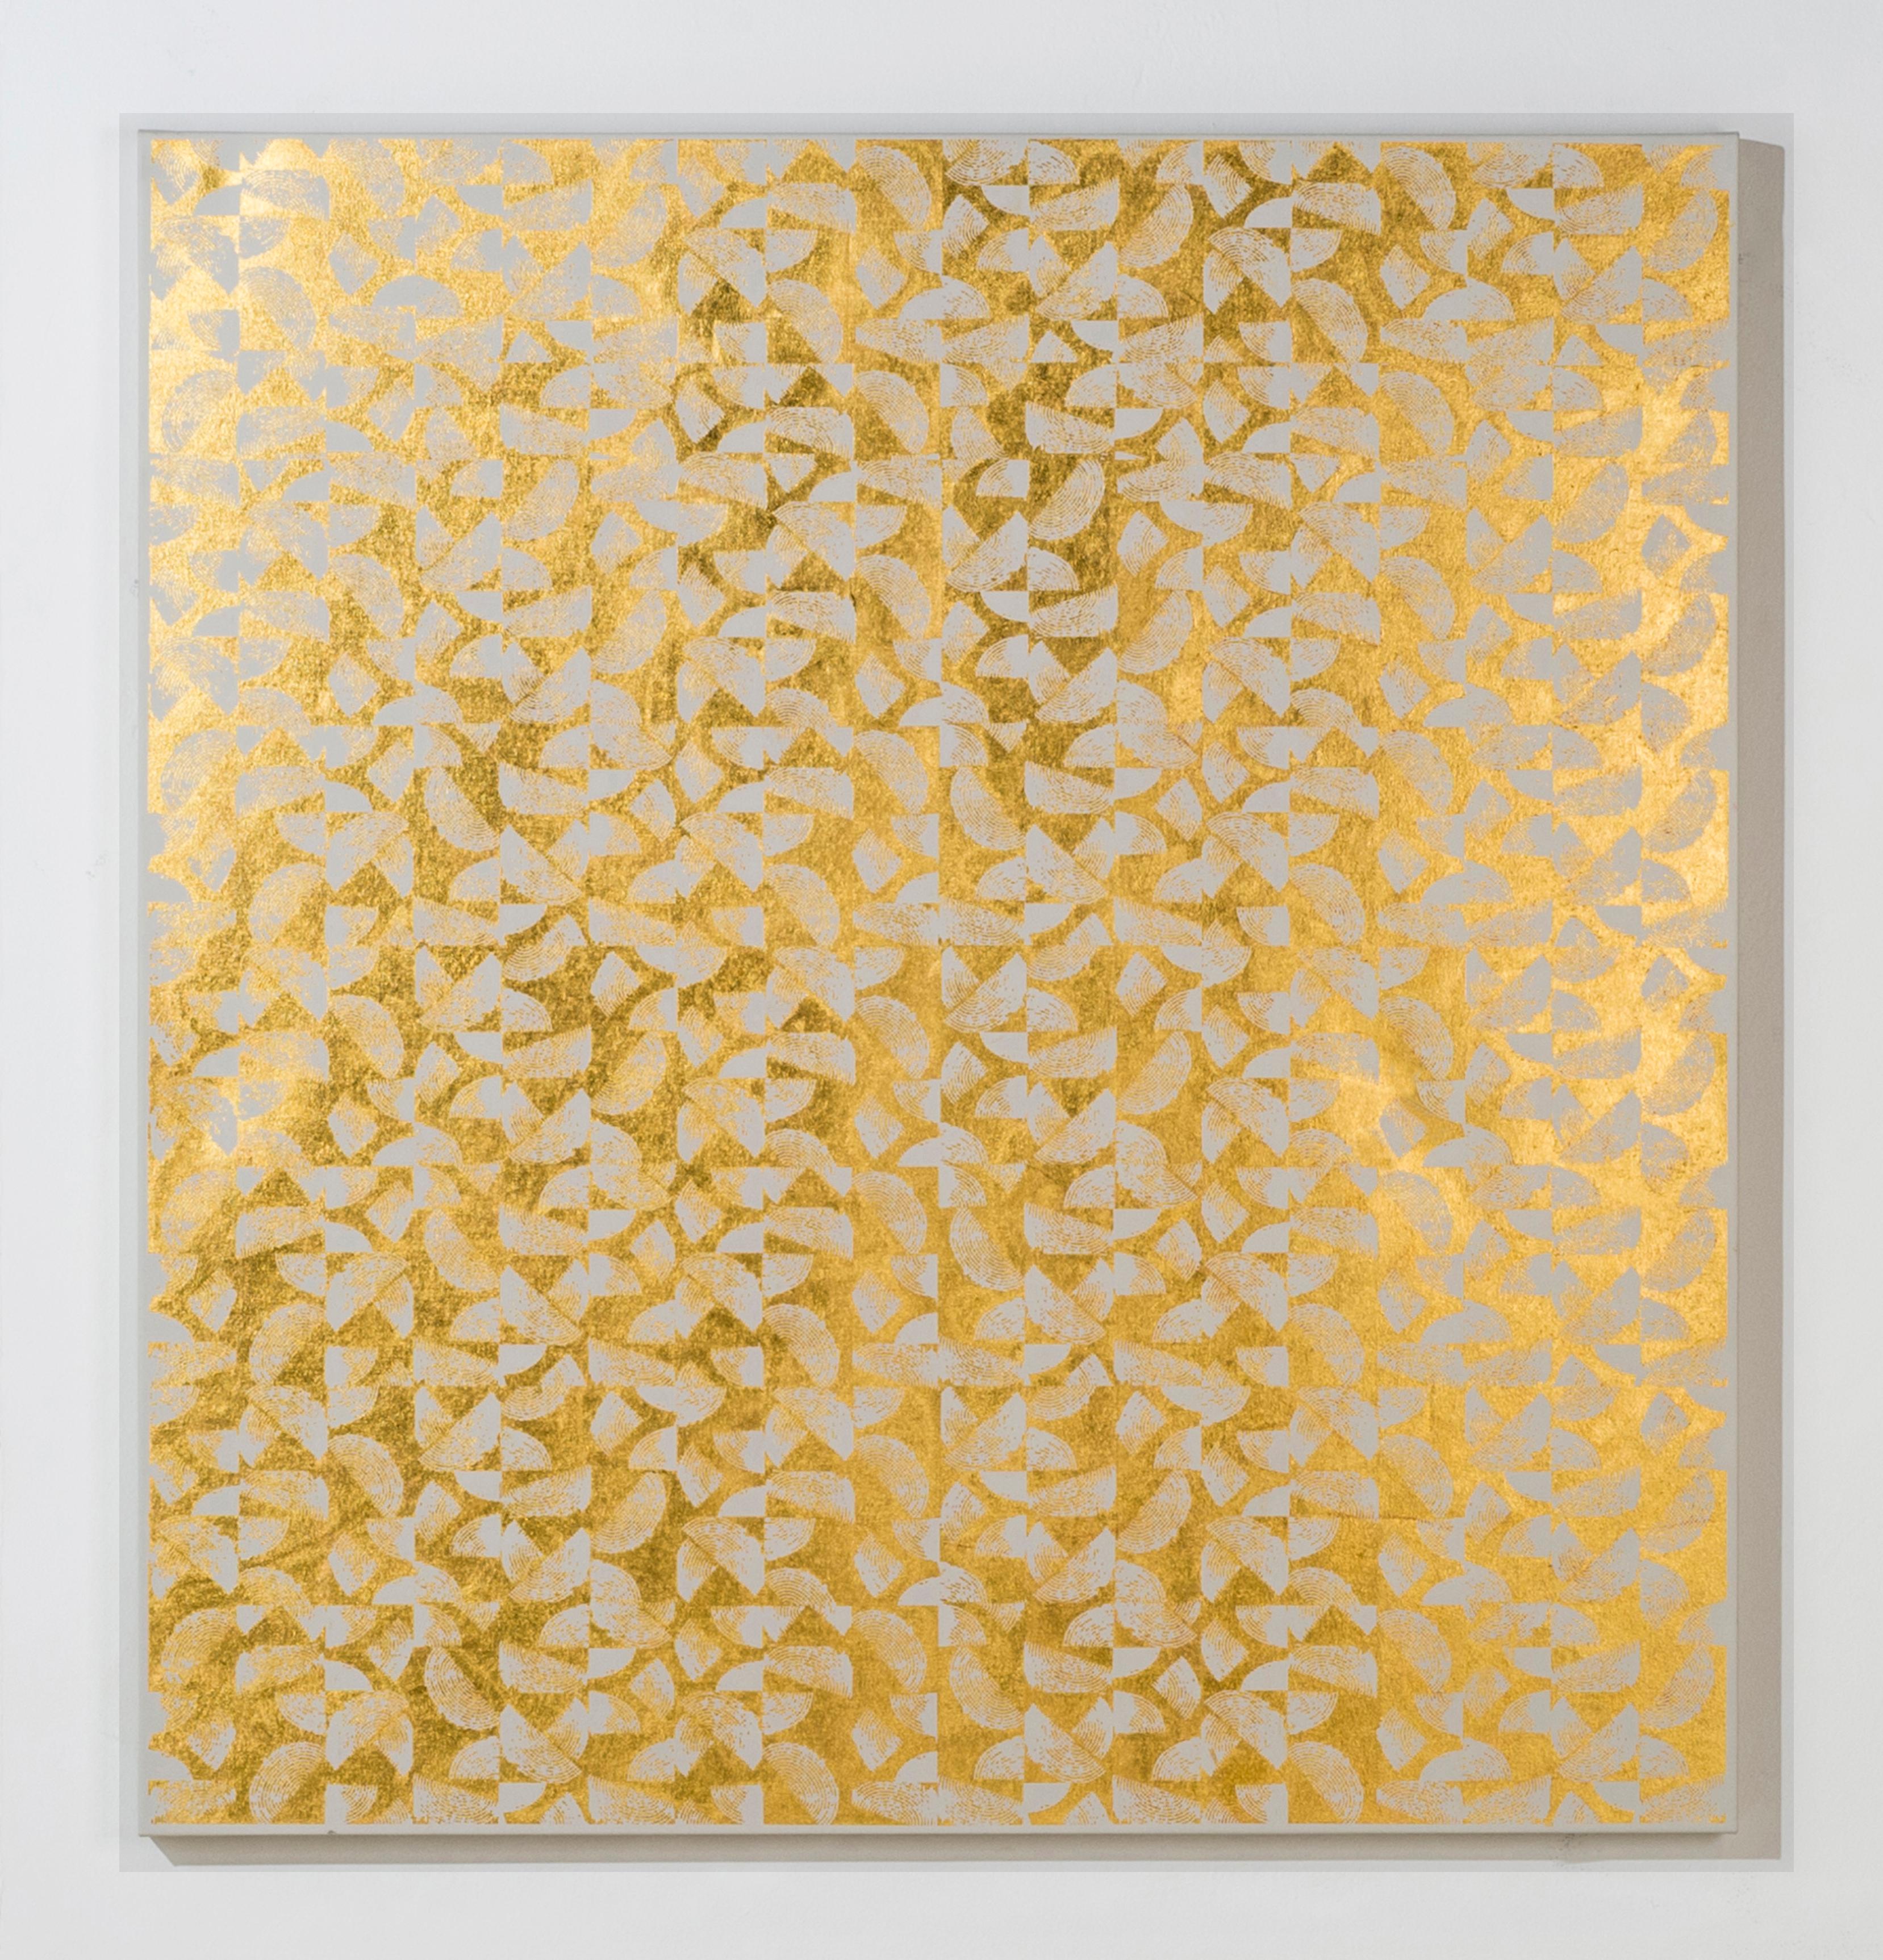 ABSTRACT COILS CANVAS I (BONE) design gold white metallic work on canvas pattern - Print by Lisa Hunt